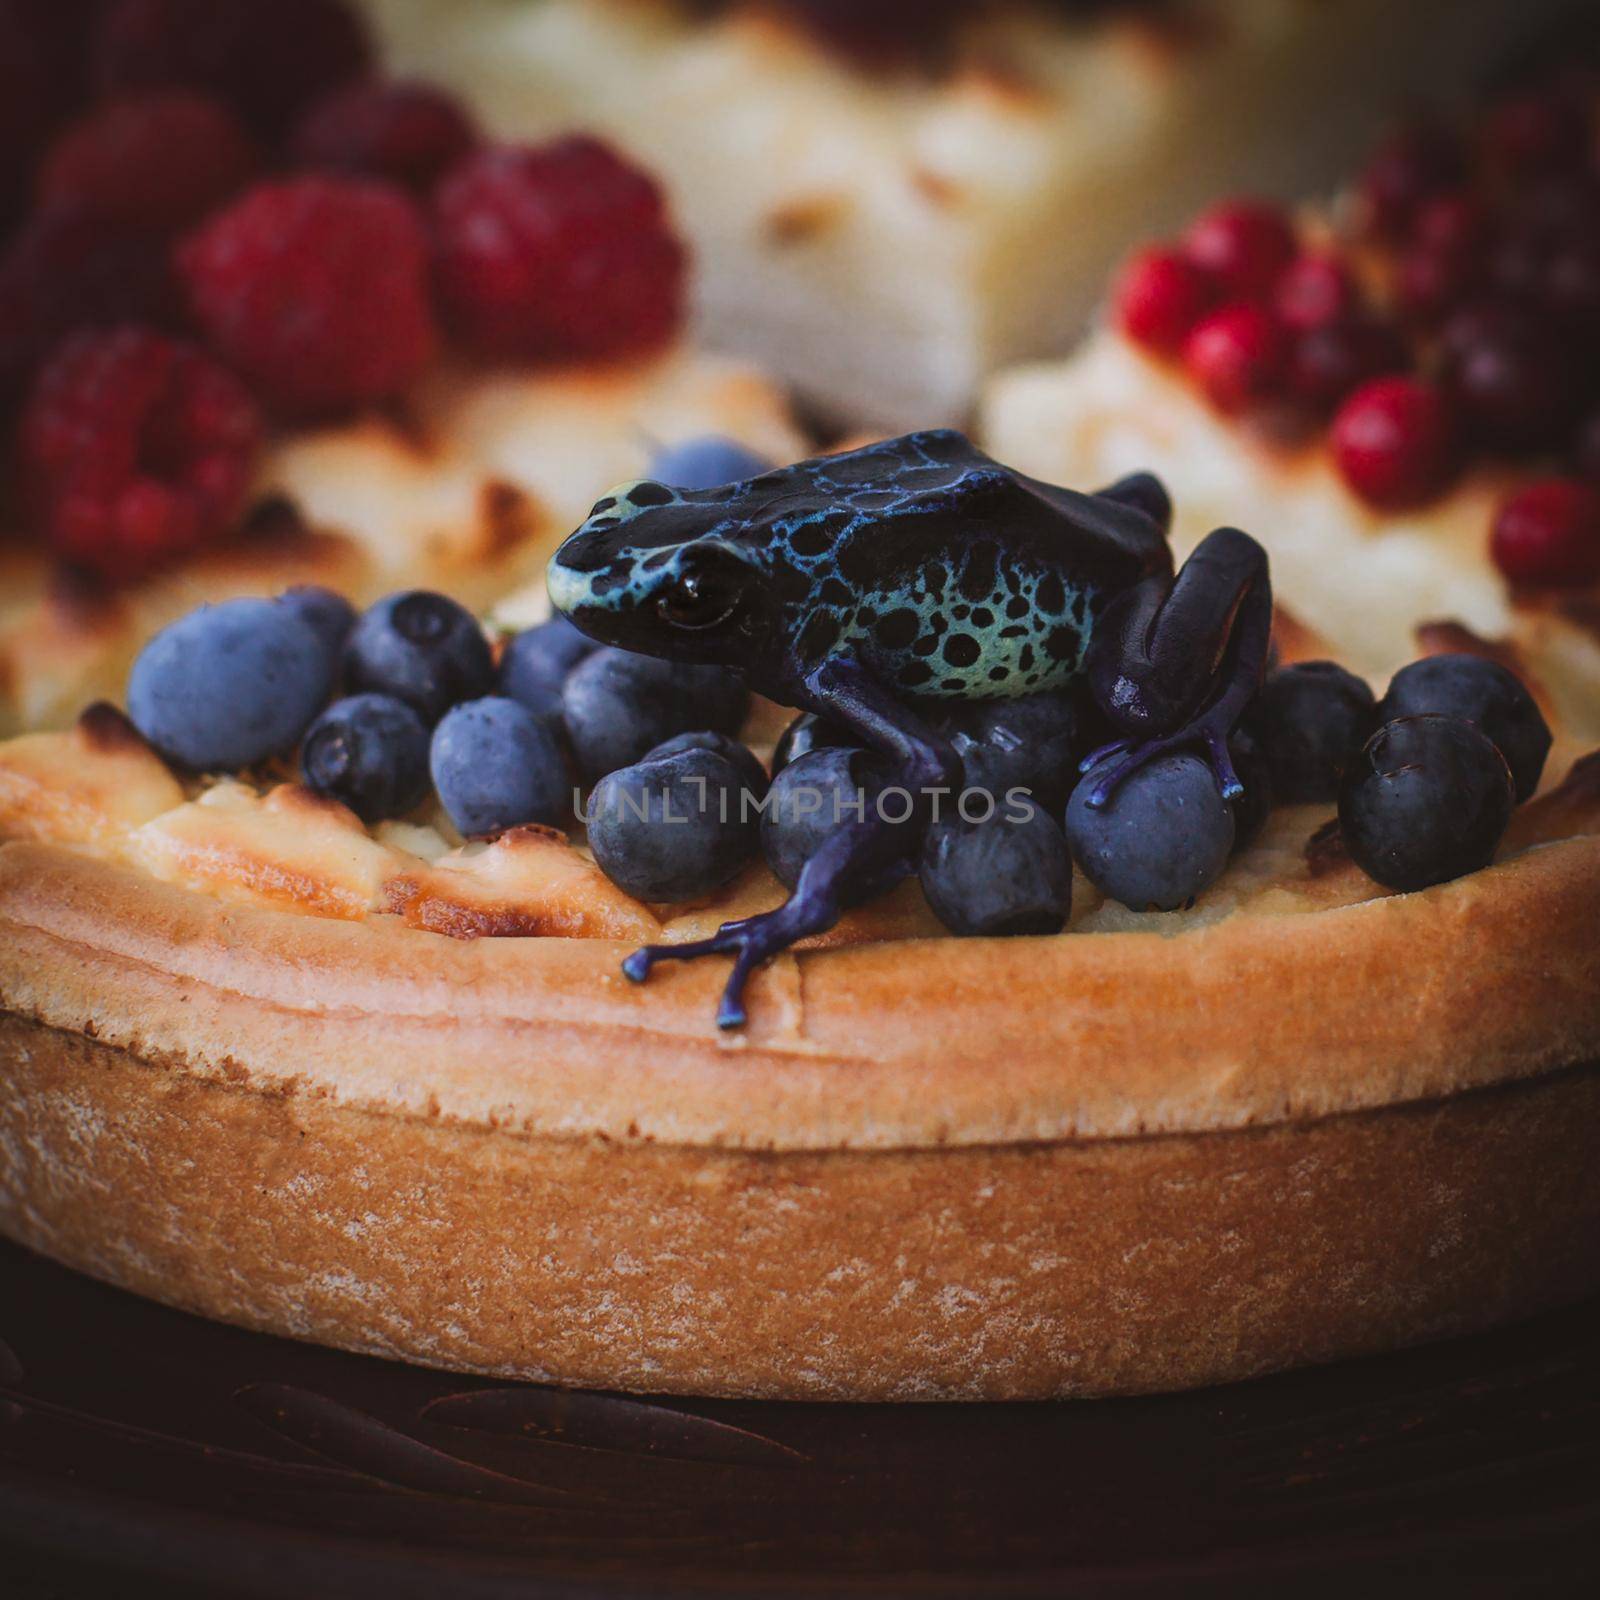 Robertus dyeing poison dart frog, Dendrobates tinctorius, Red-eyed tree frog homemade cheesecake Pie with berries On Wooden Background